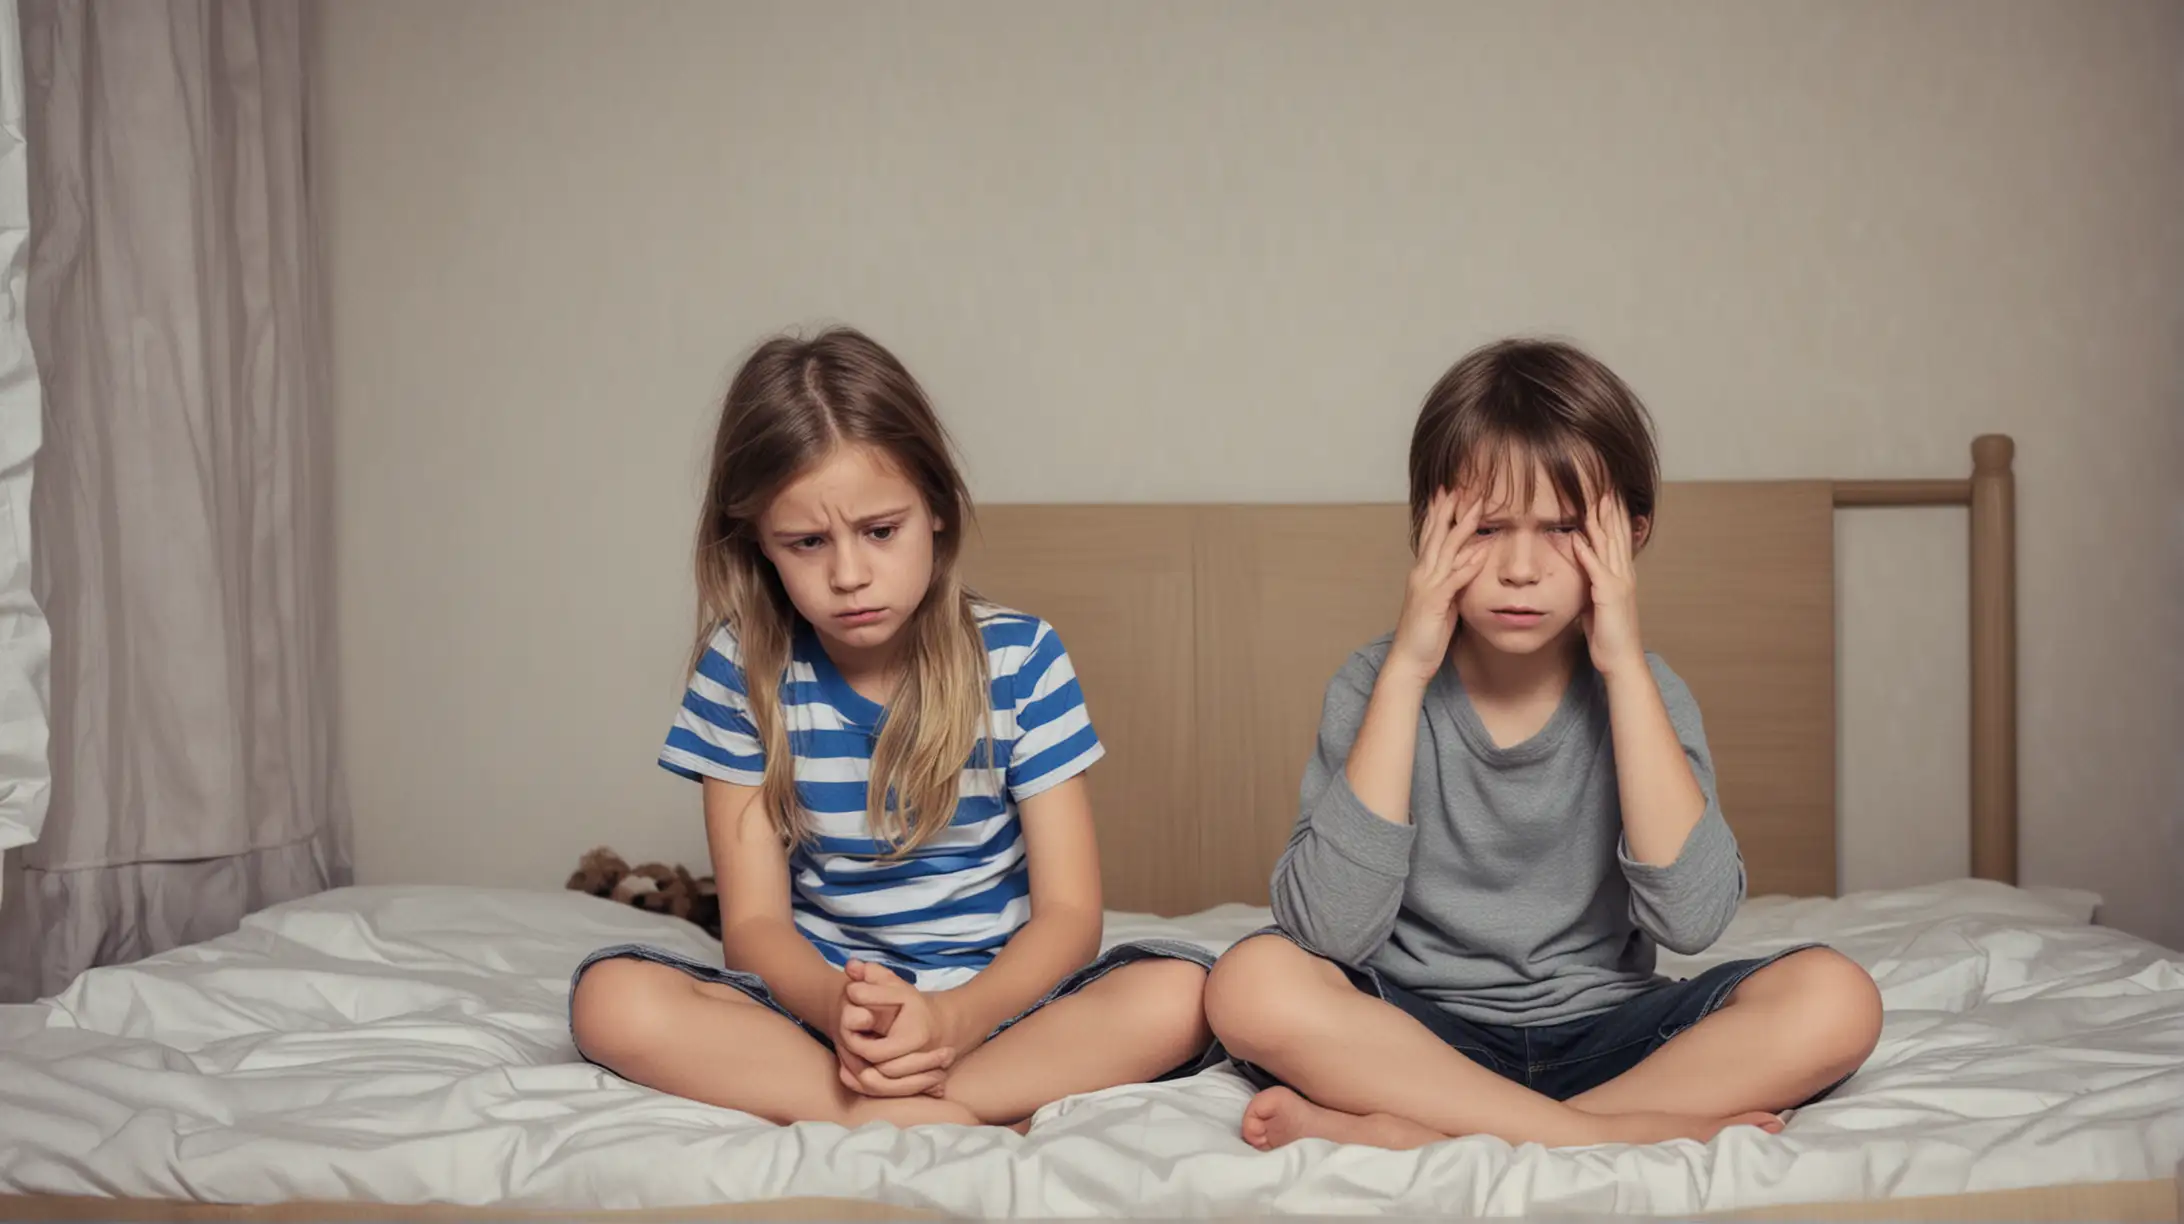 Childhood Conflict Sibling Rivalry in a Bedroom Setting